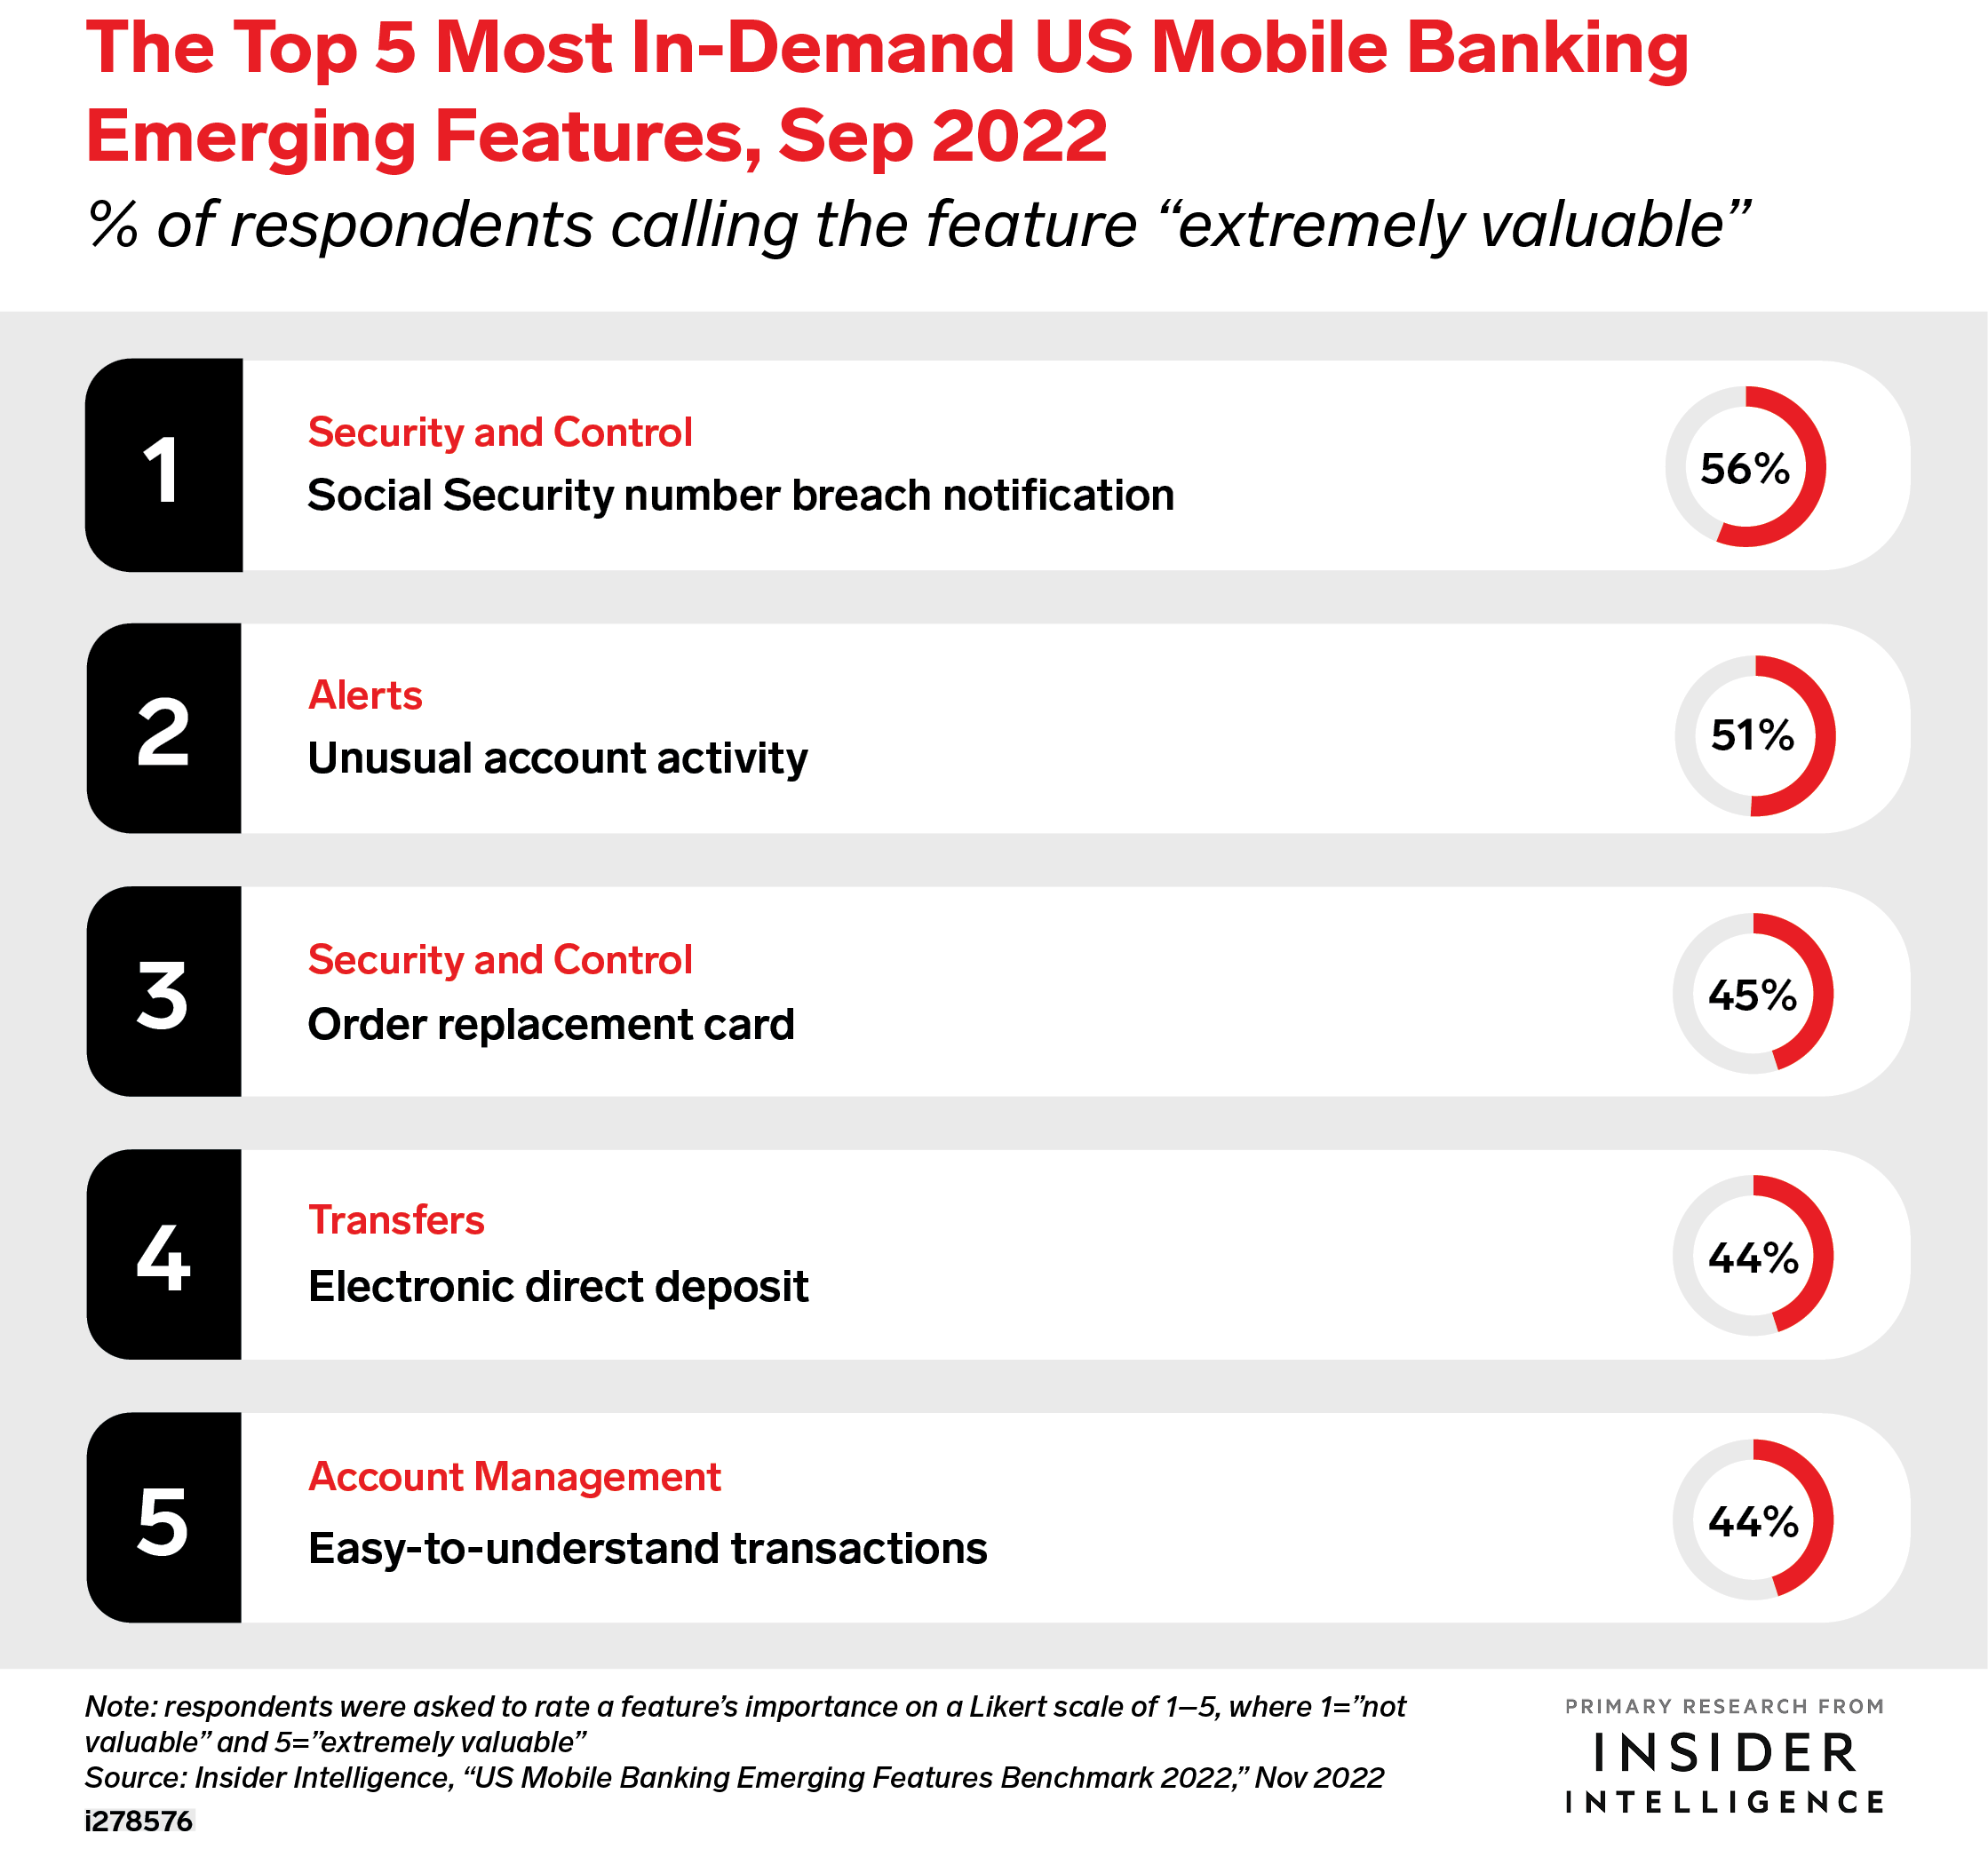 The Top 5 Most In-Demand US Mobile Banking Emerging Features, Sep 2022 (% of respondents calling the feature 